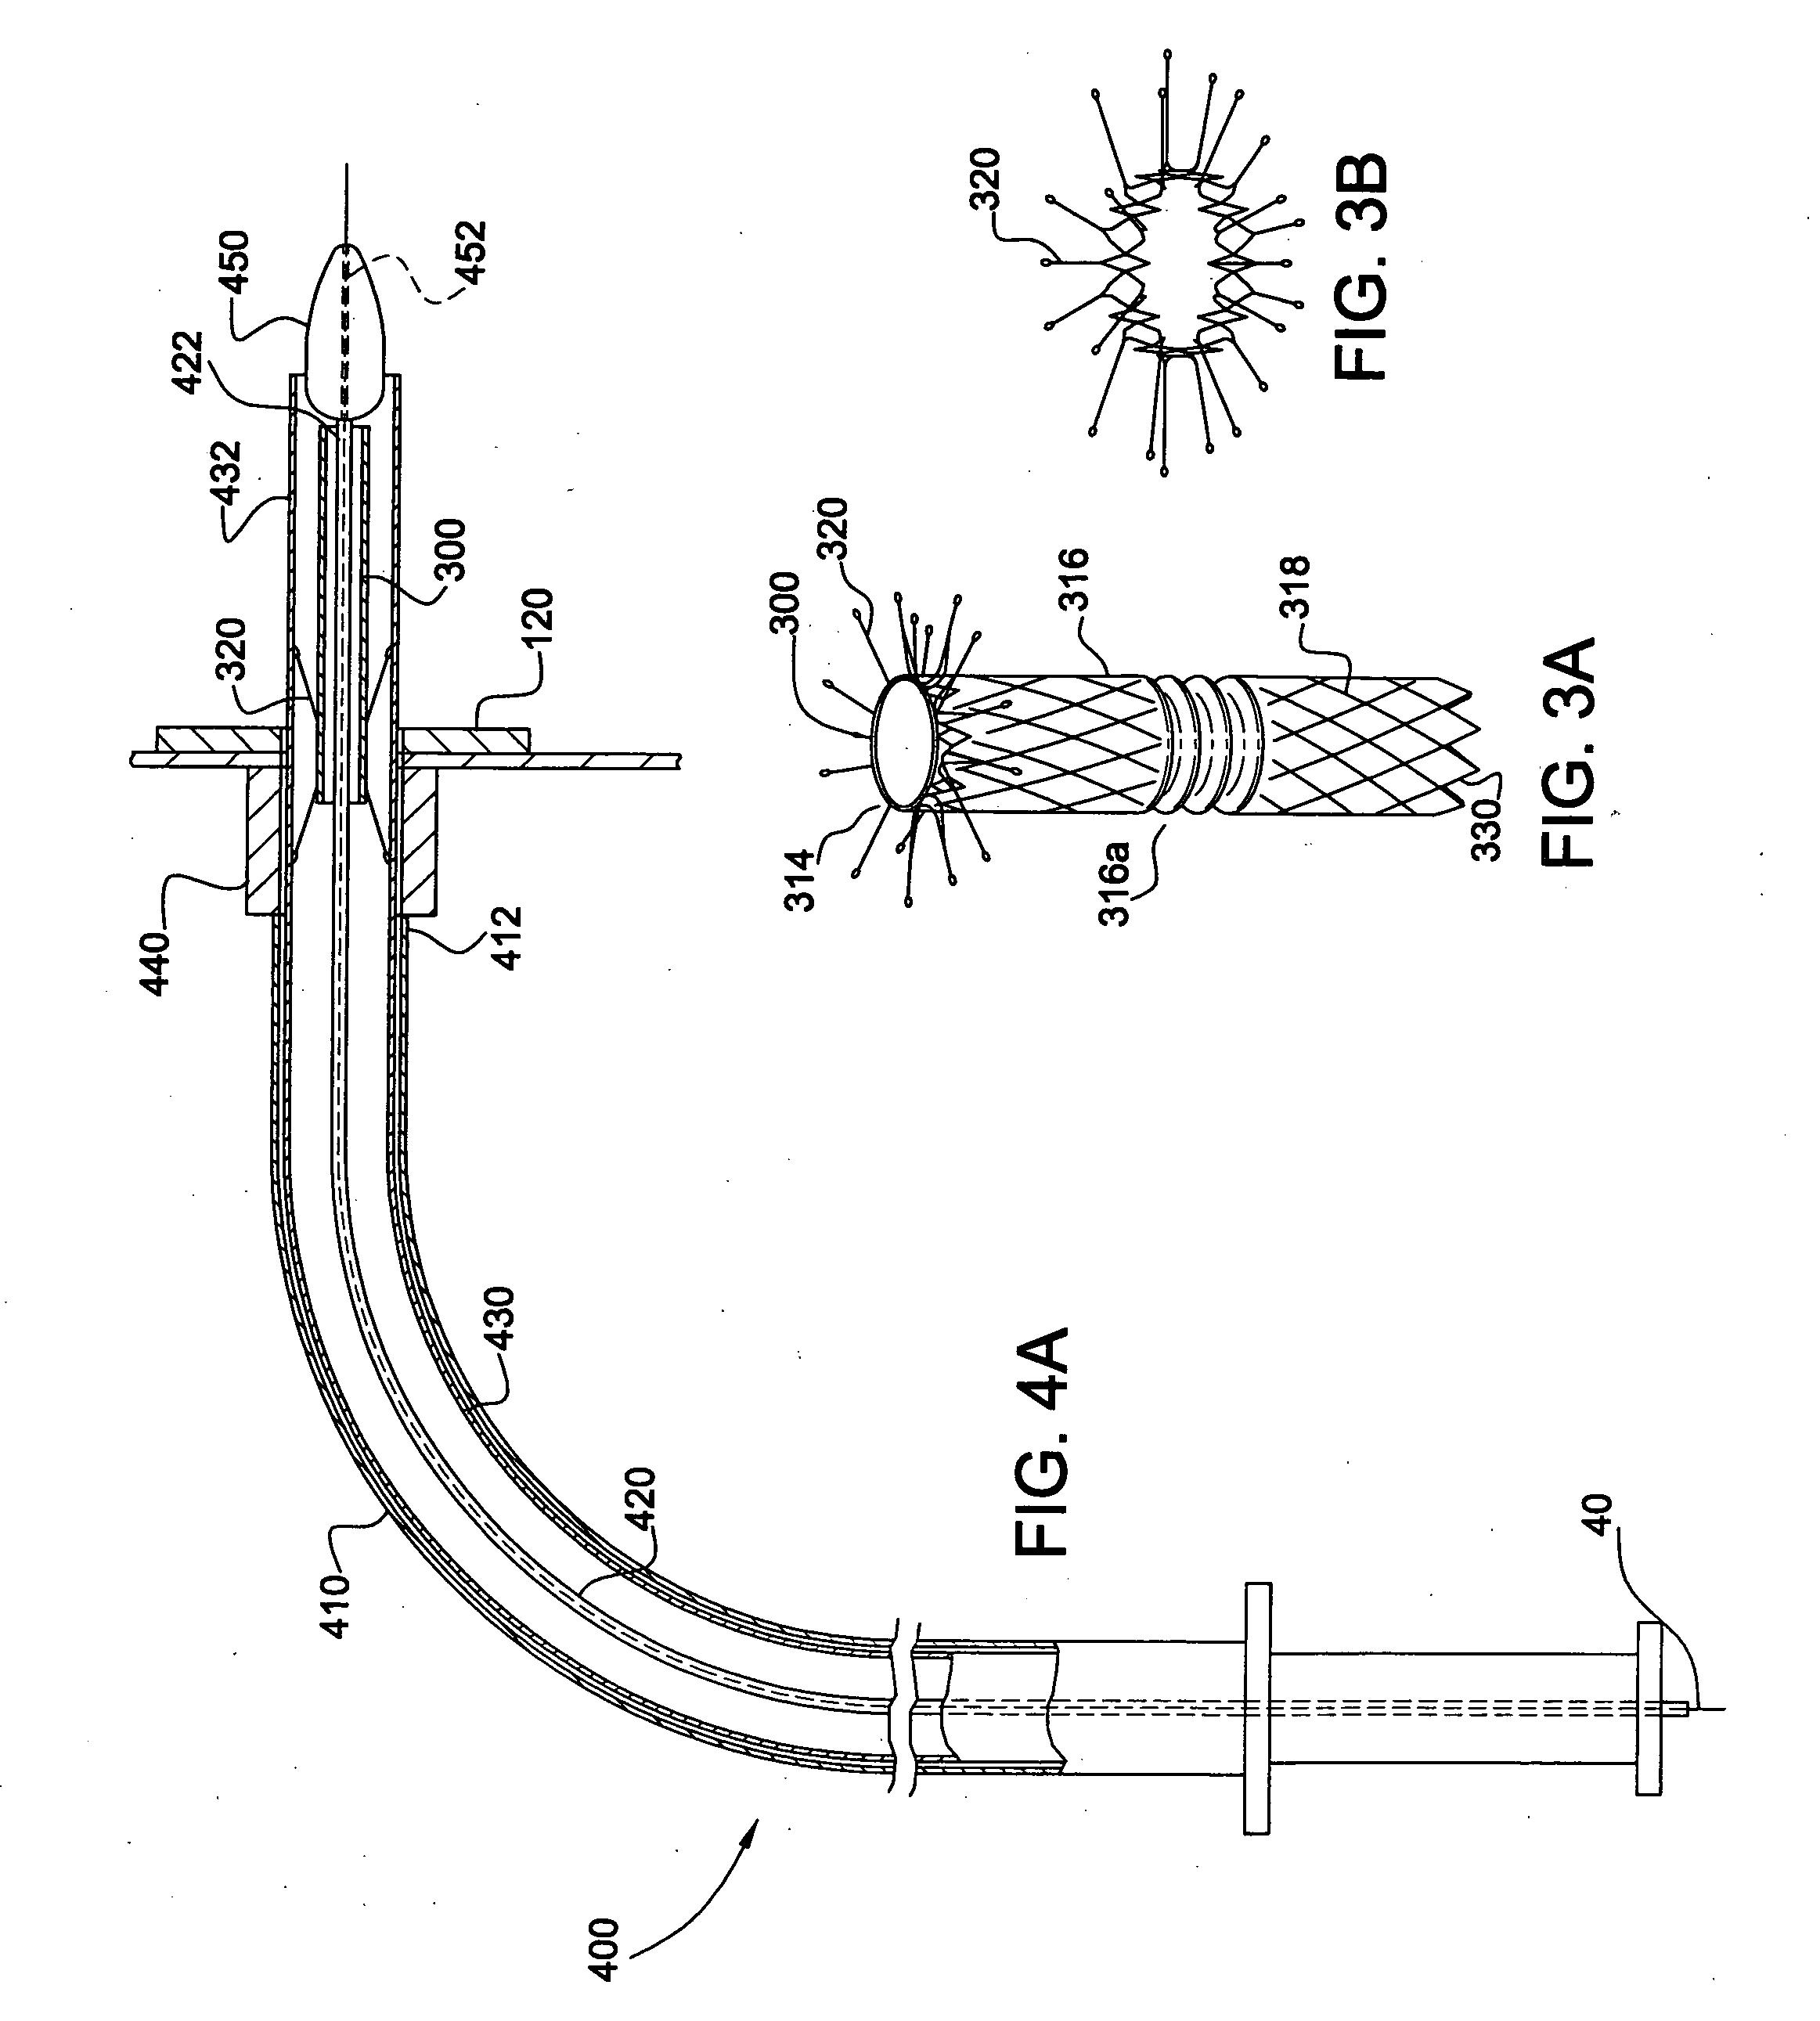 System and method for endoluminal grafting of bifurcated and branched vessels